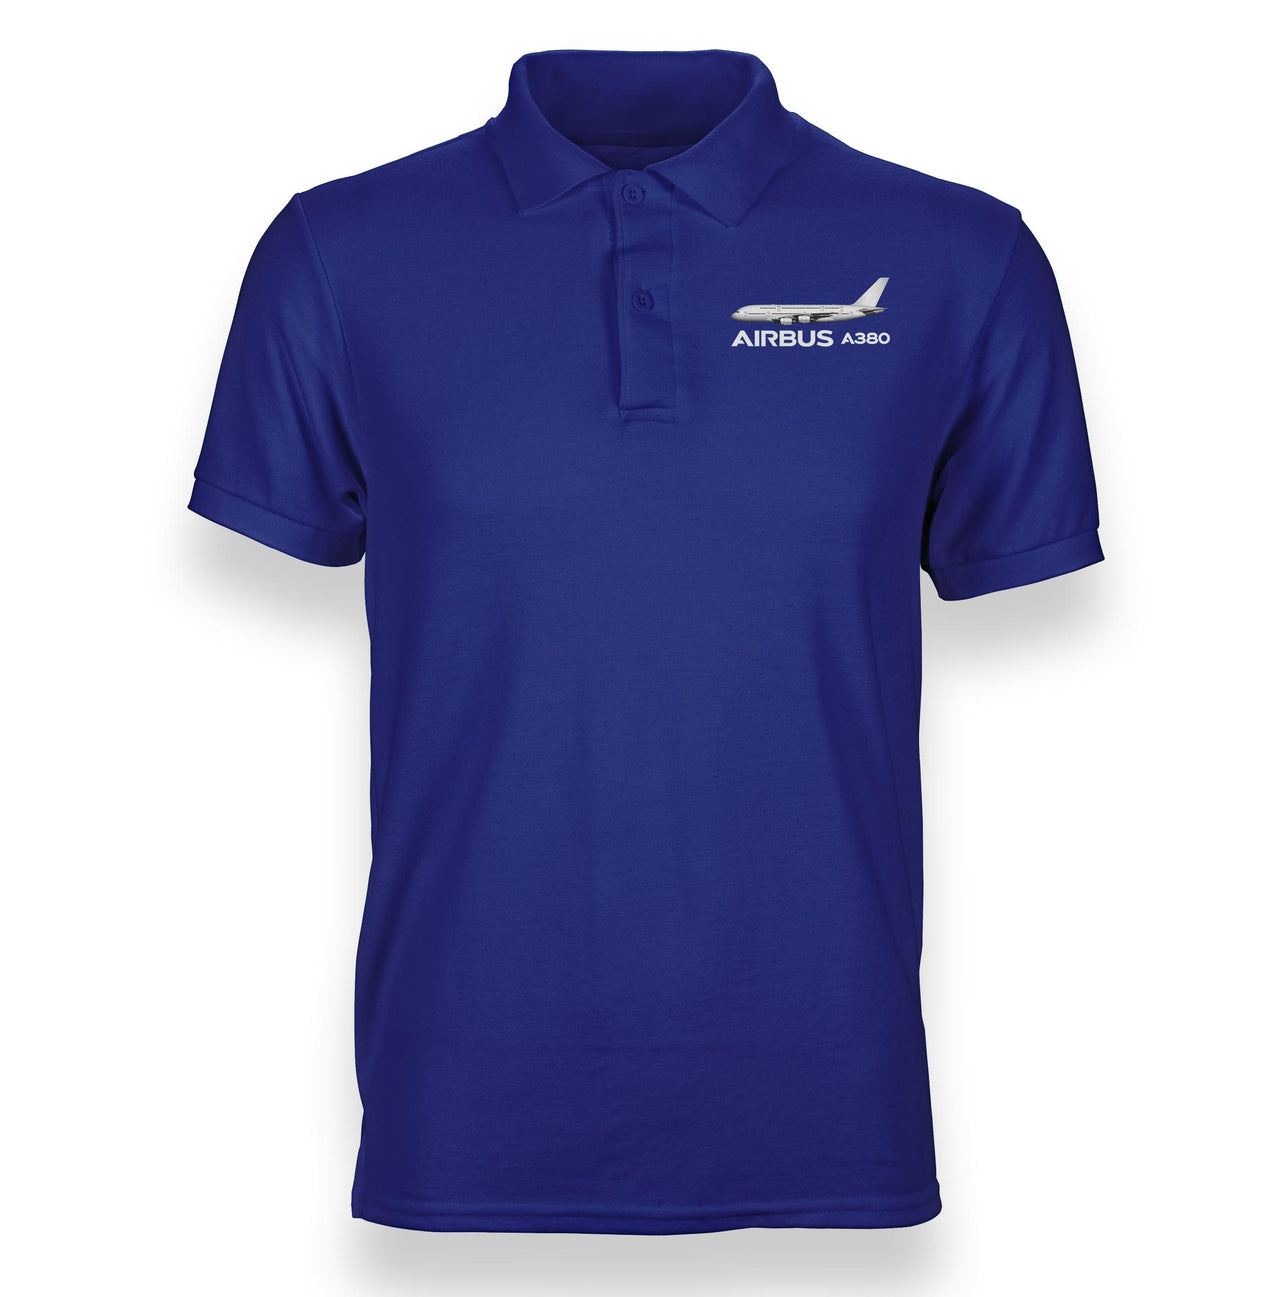 The Airbus A380 Designed Polo T-Shirts